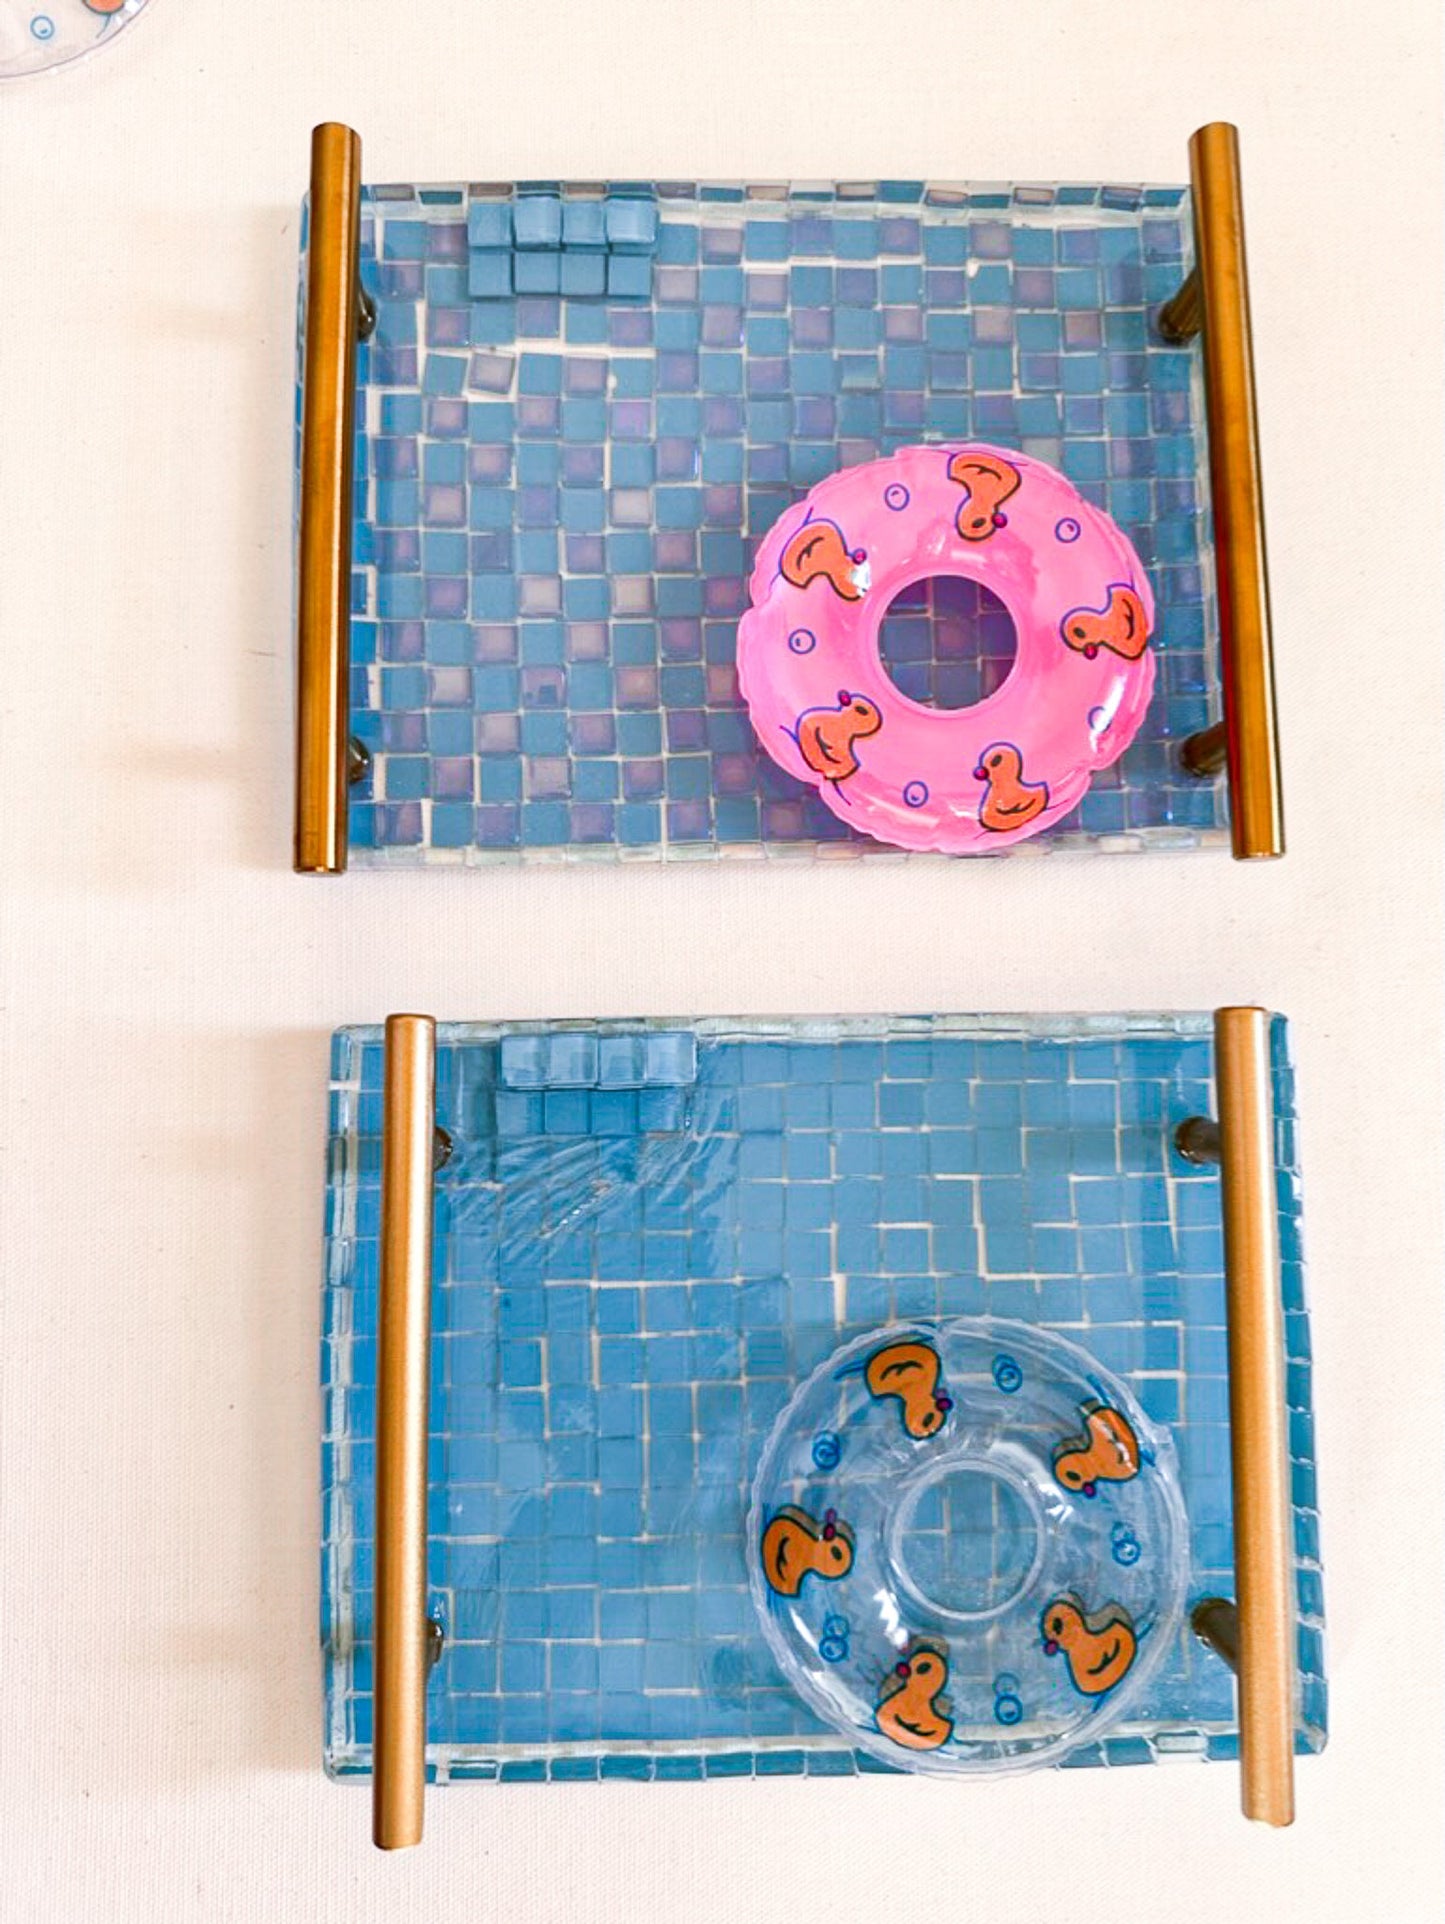 Pool trinket tray ~ Small serving tray or bathroom product tray ~ made with tiles and a small pool floaty! summer decor tray with handles